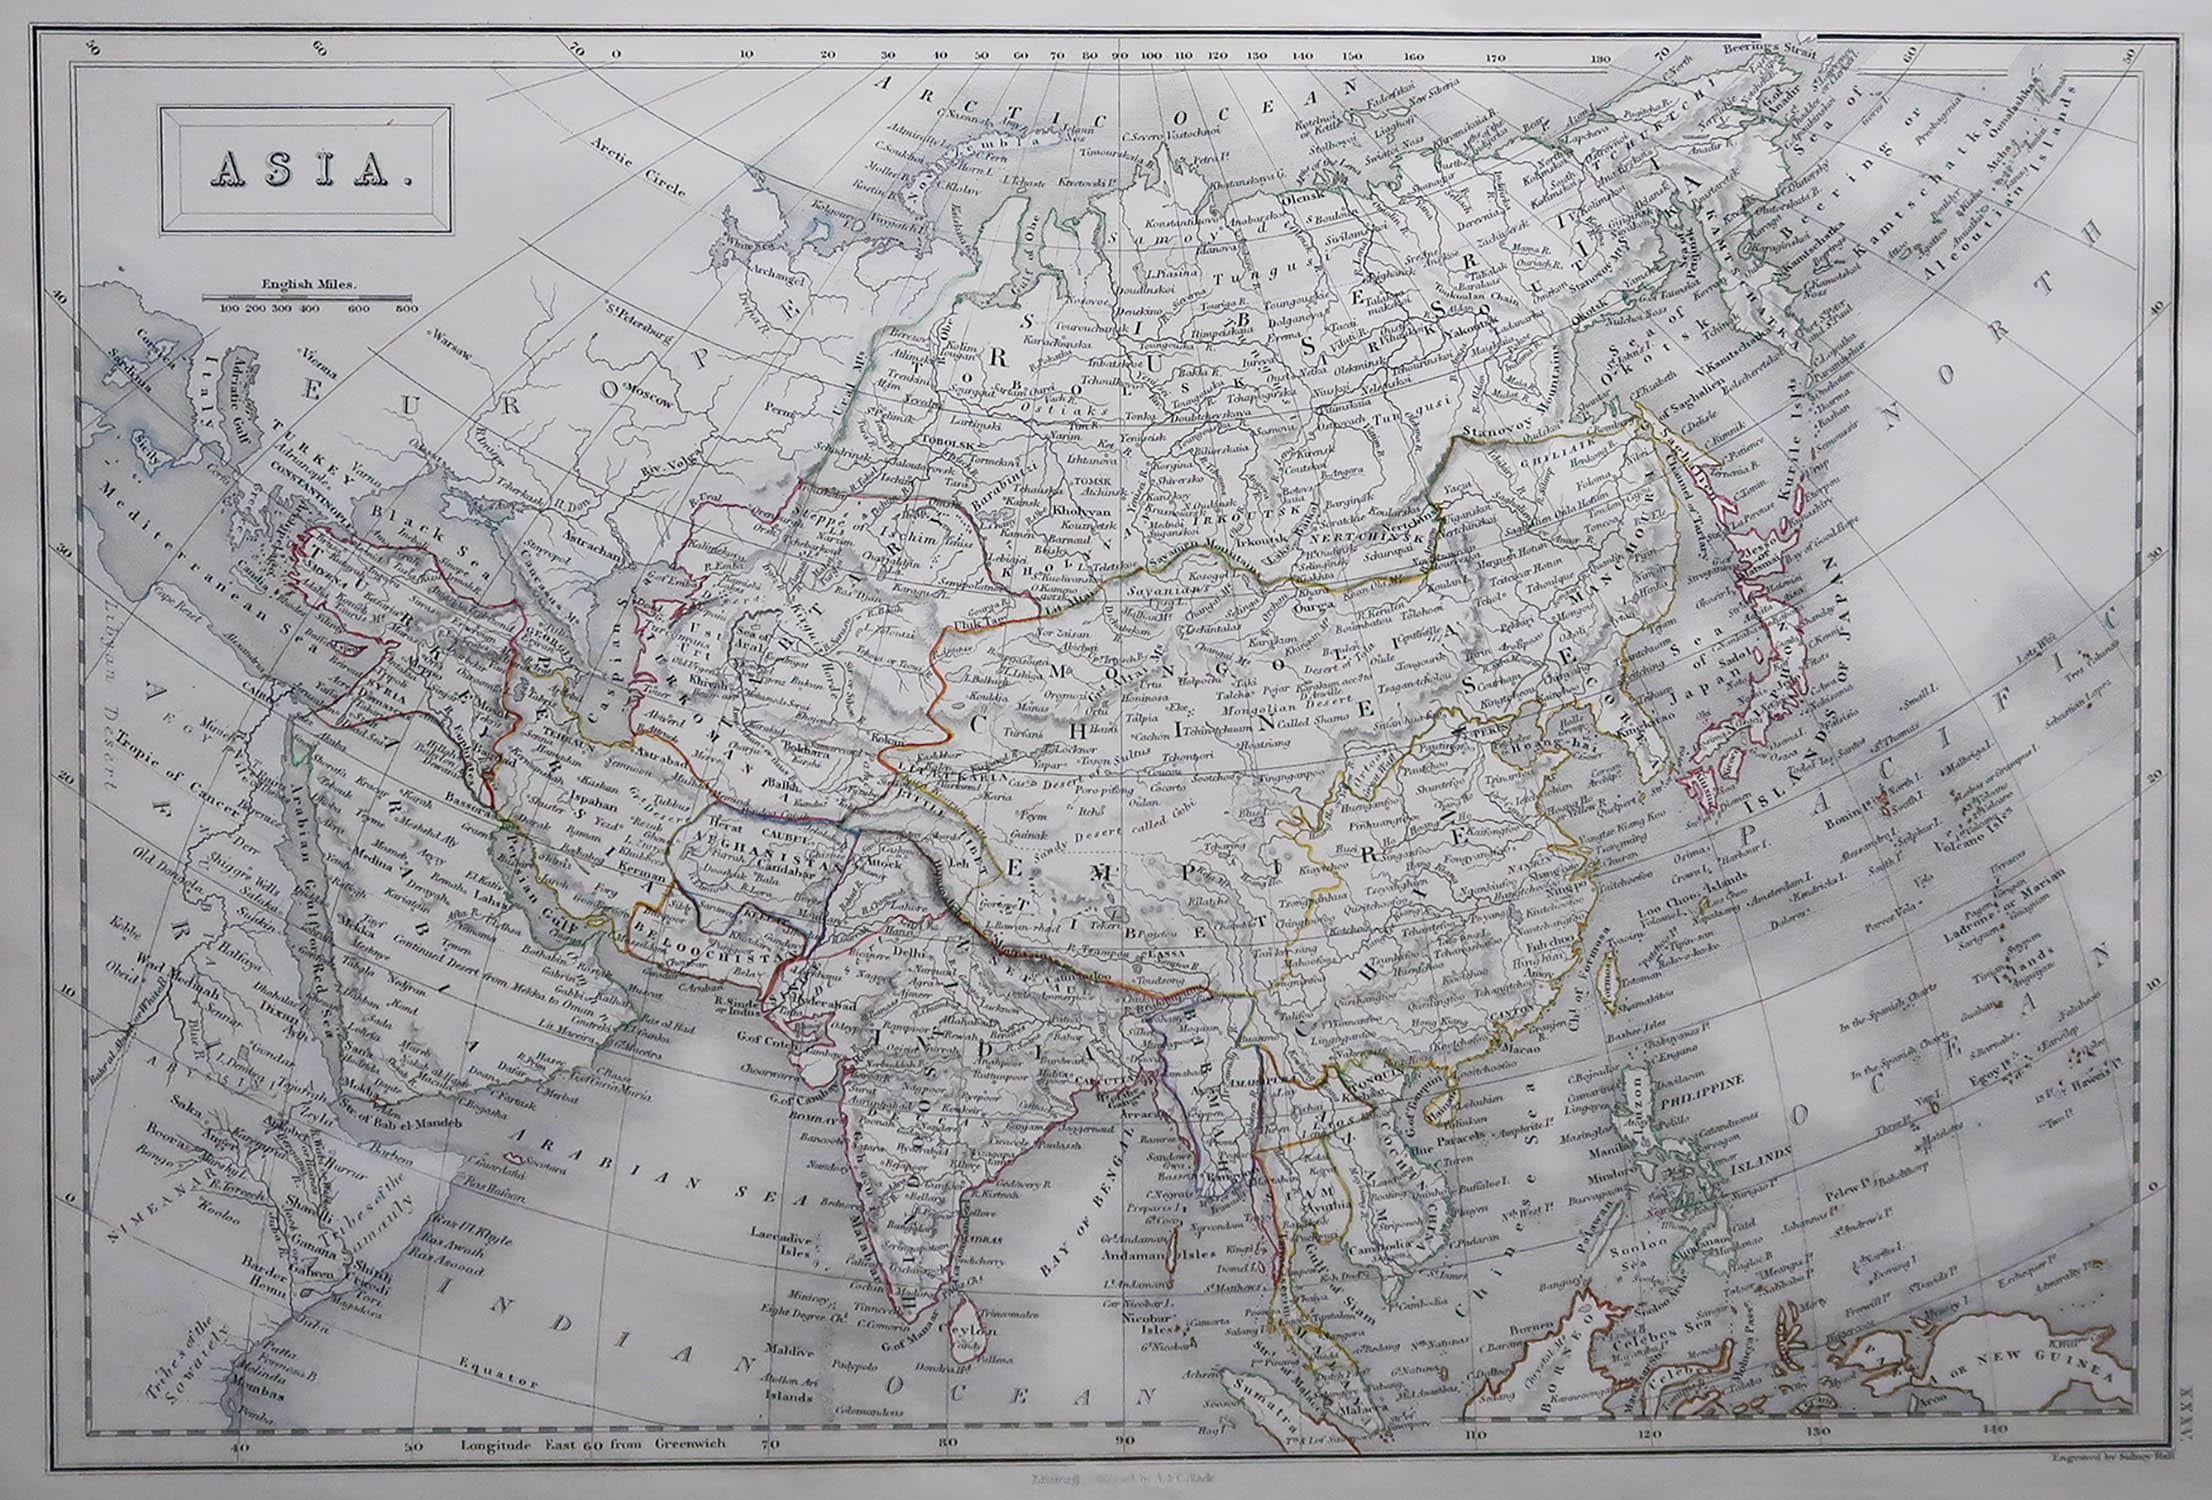 Great map of Asia

Drawn and engraved by Sidney Hall

Steel engraving 

Original colour outline

Published by A & C Black. 1847

Unframed

Free shipping

